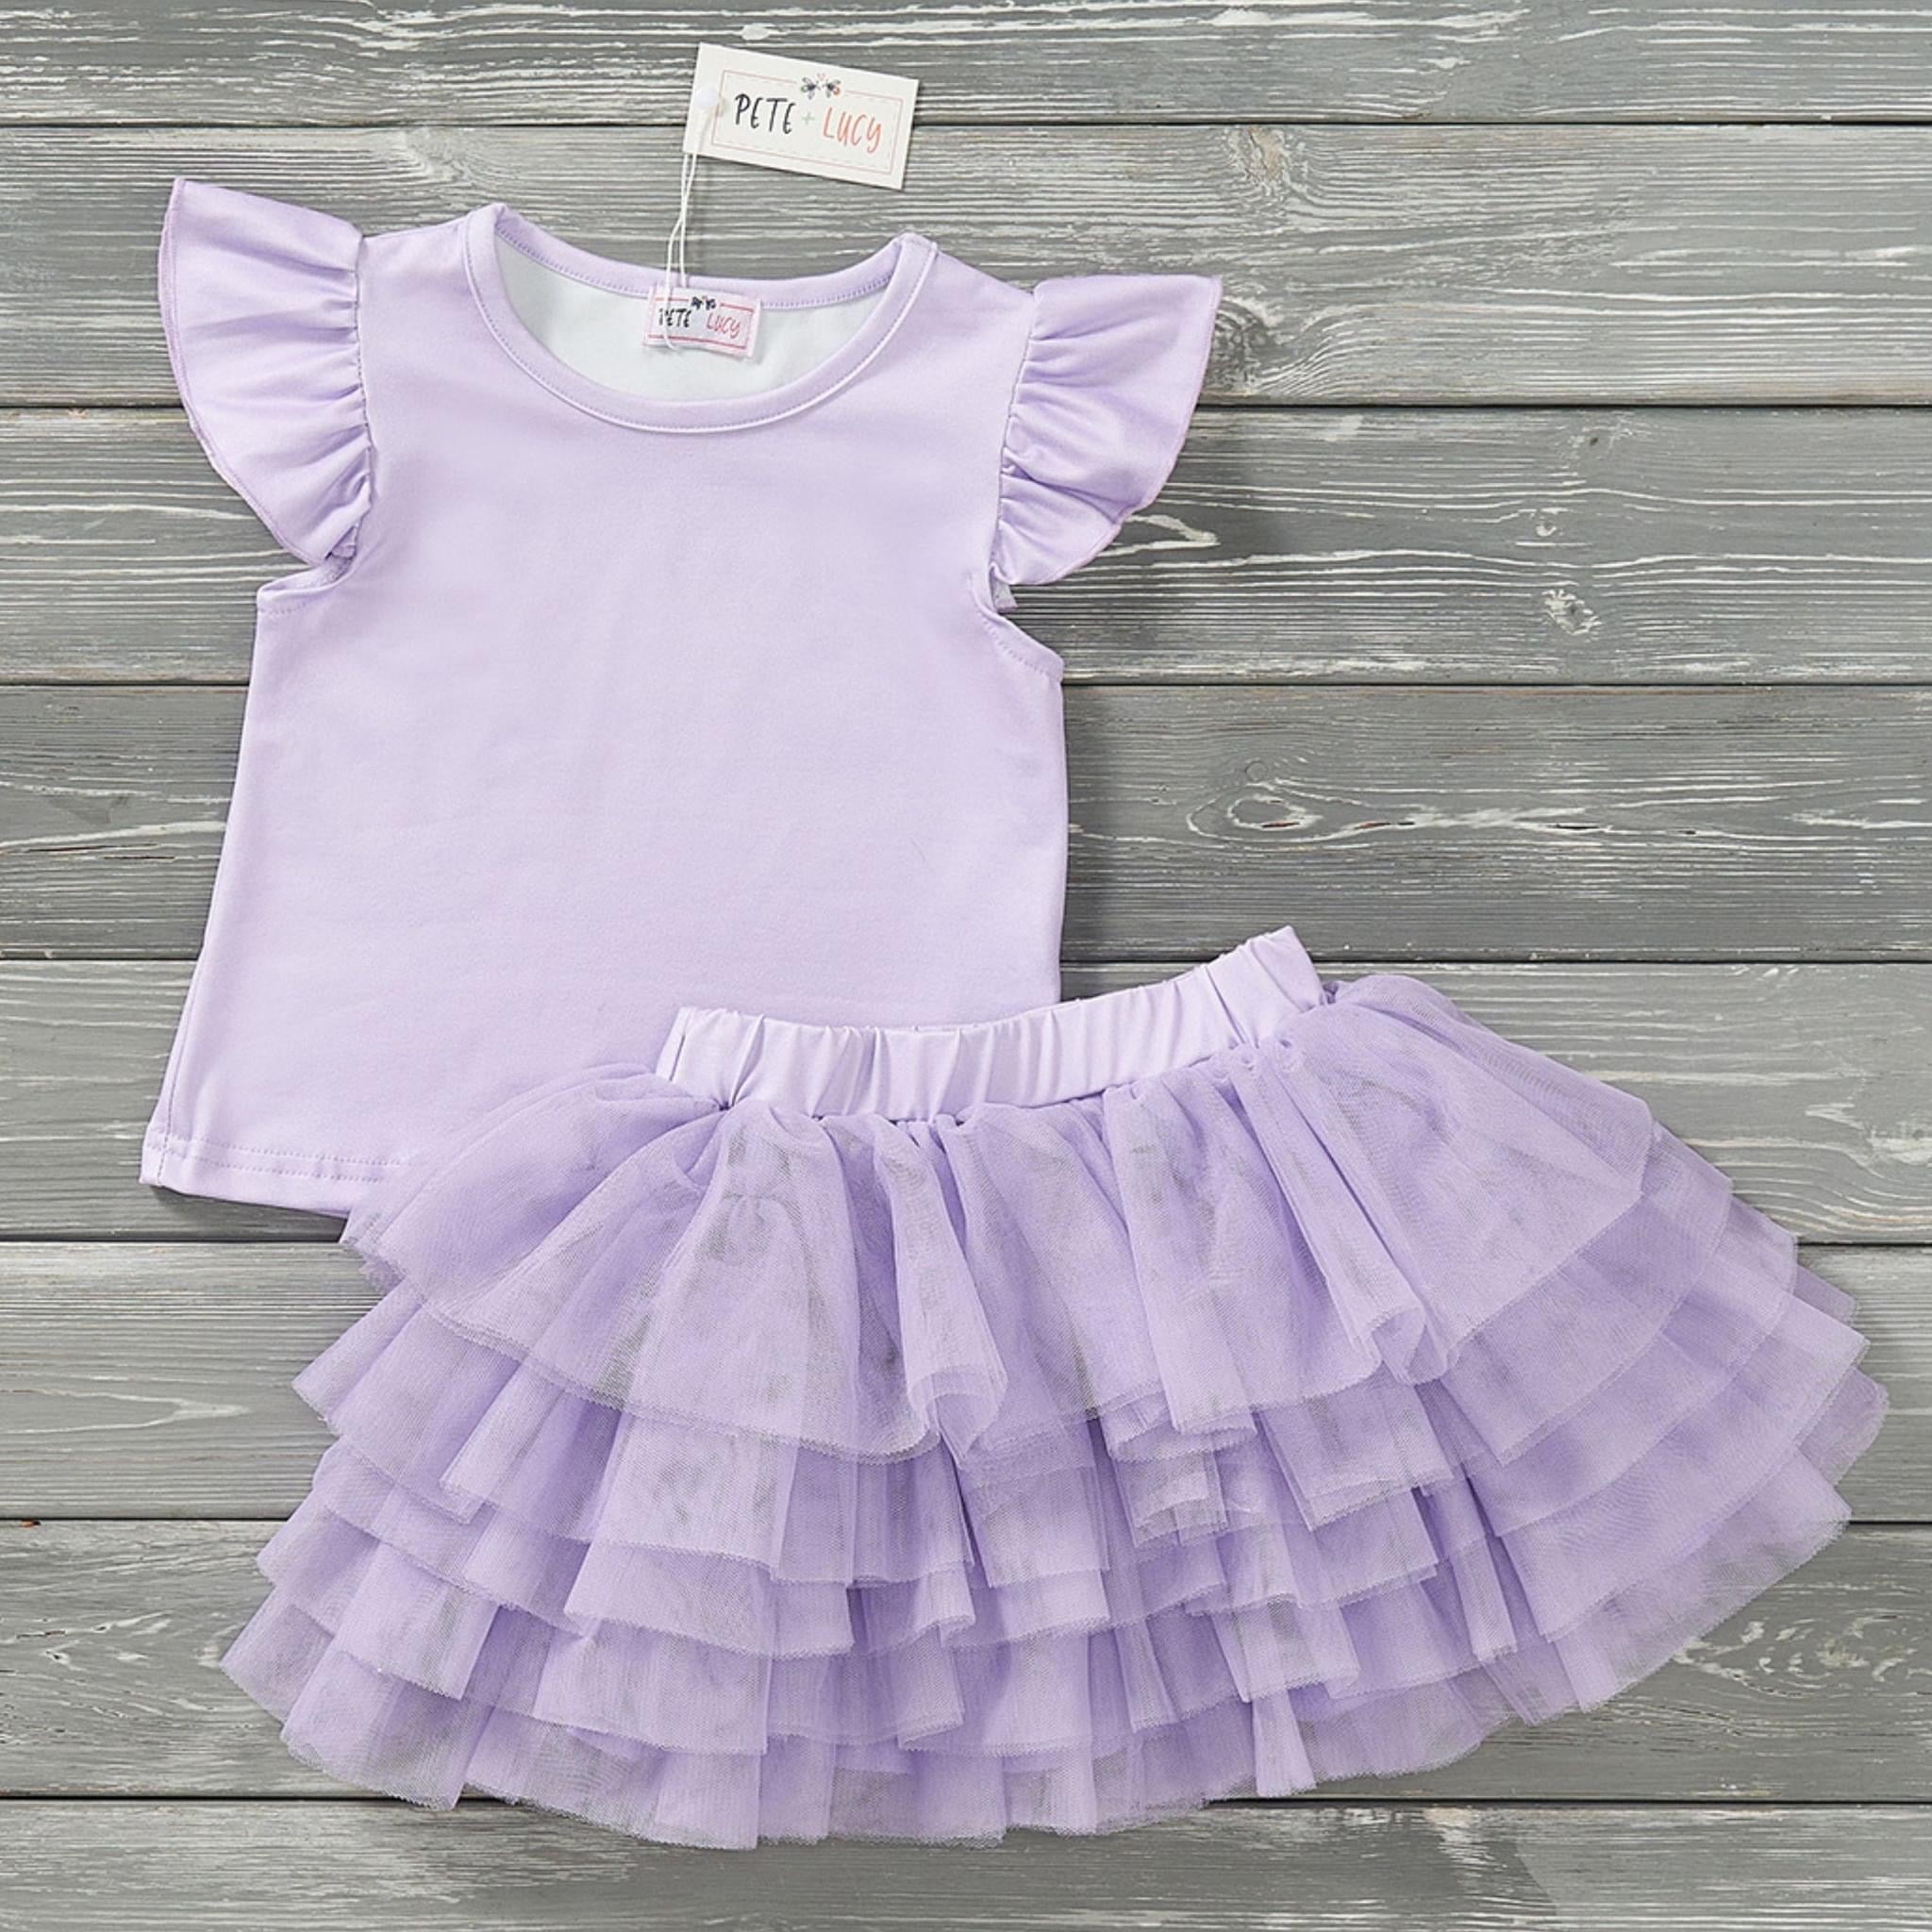 Lovely Lavender Tulle Dress by Pete and Lucy